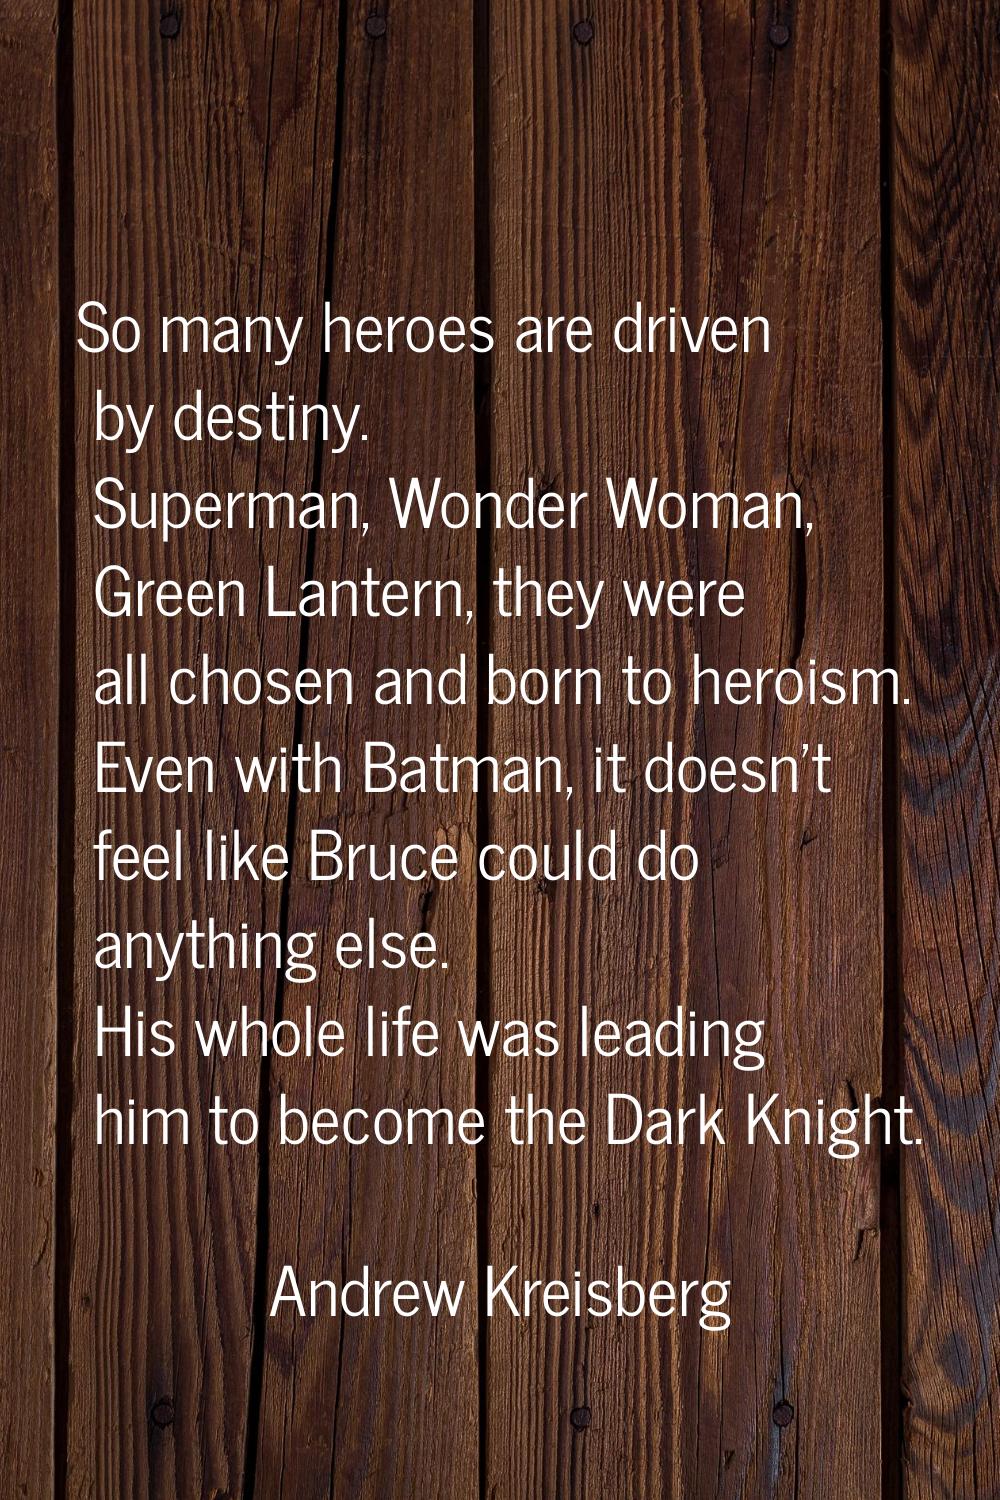 So many heroes are driven by destiny. Superman, Wonder Woman, Green Lantern, they were all chosen a